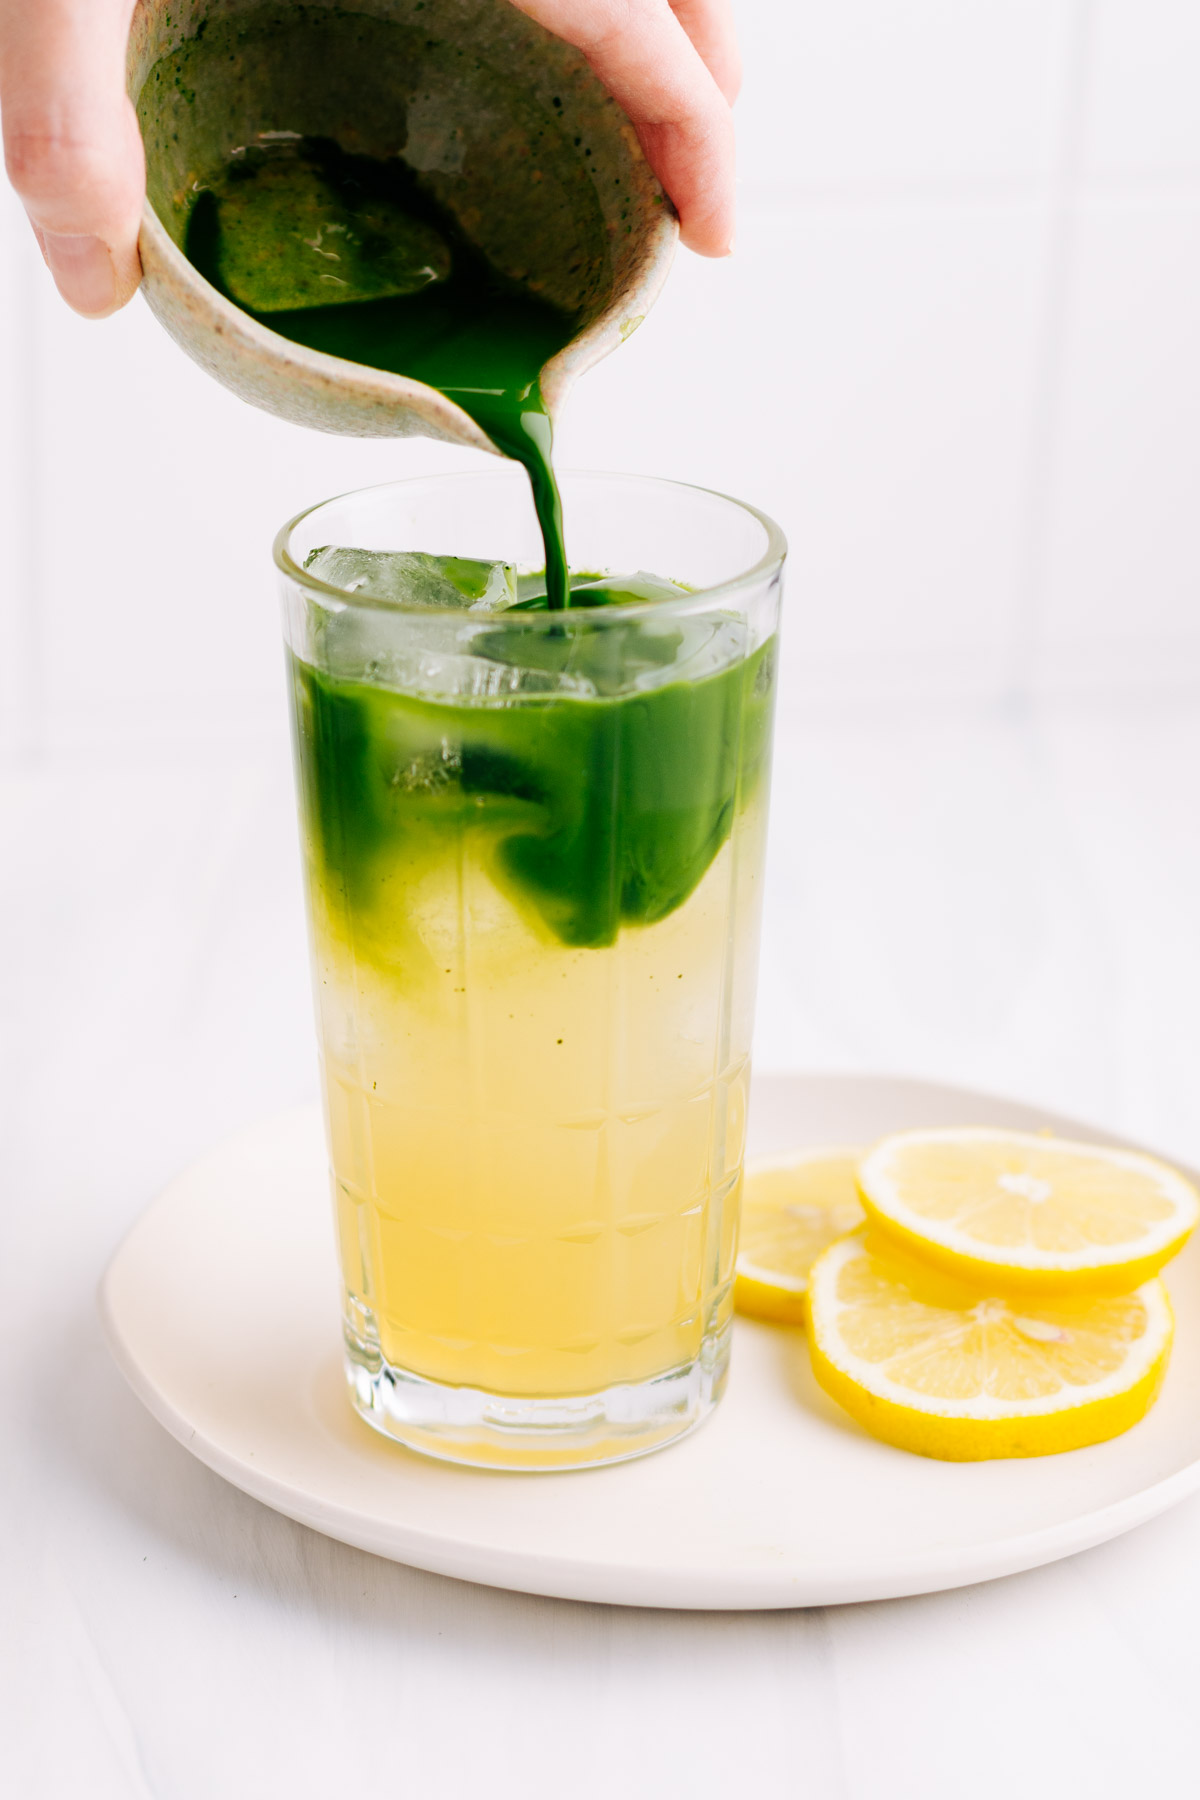 A glass with yellow lemonade and ice cubes on a white plate with lemon slices and a hand pouring in from a small bowl green matcha tea creating two separate colors in the glass